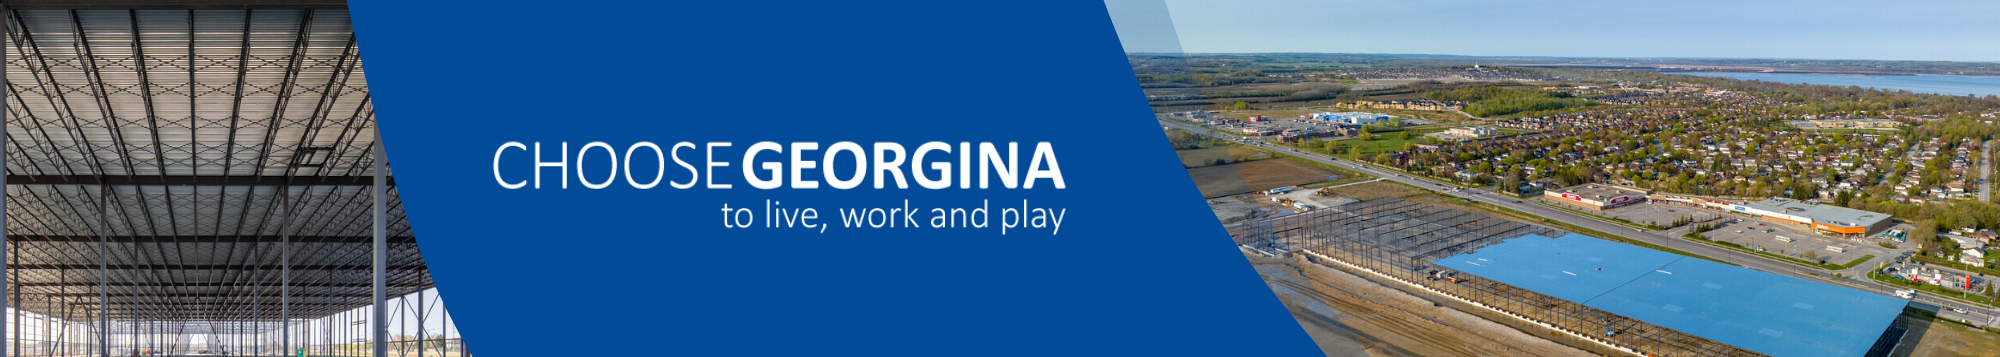 Images of construction work and a drone photo of the town with the text Choose Georgina to live, work and play